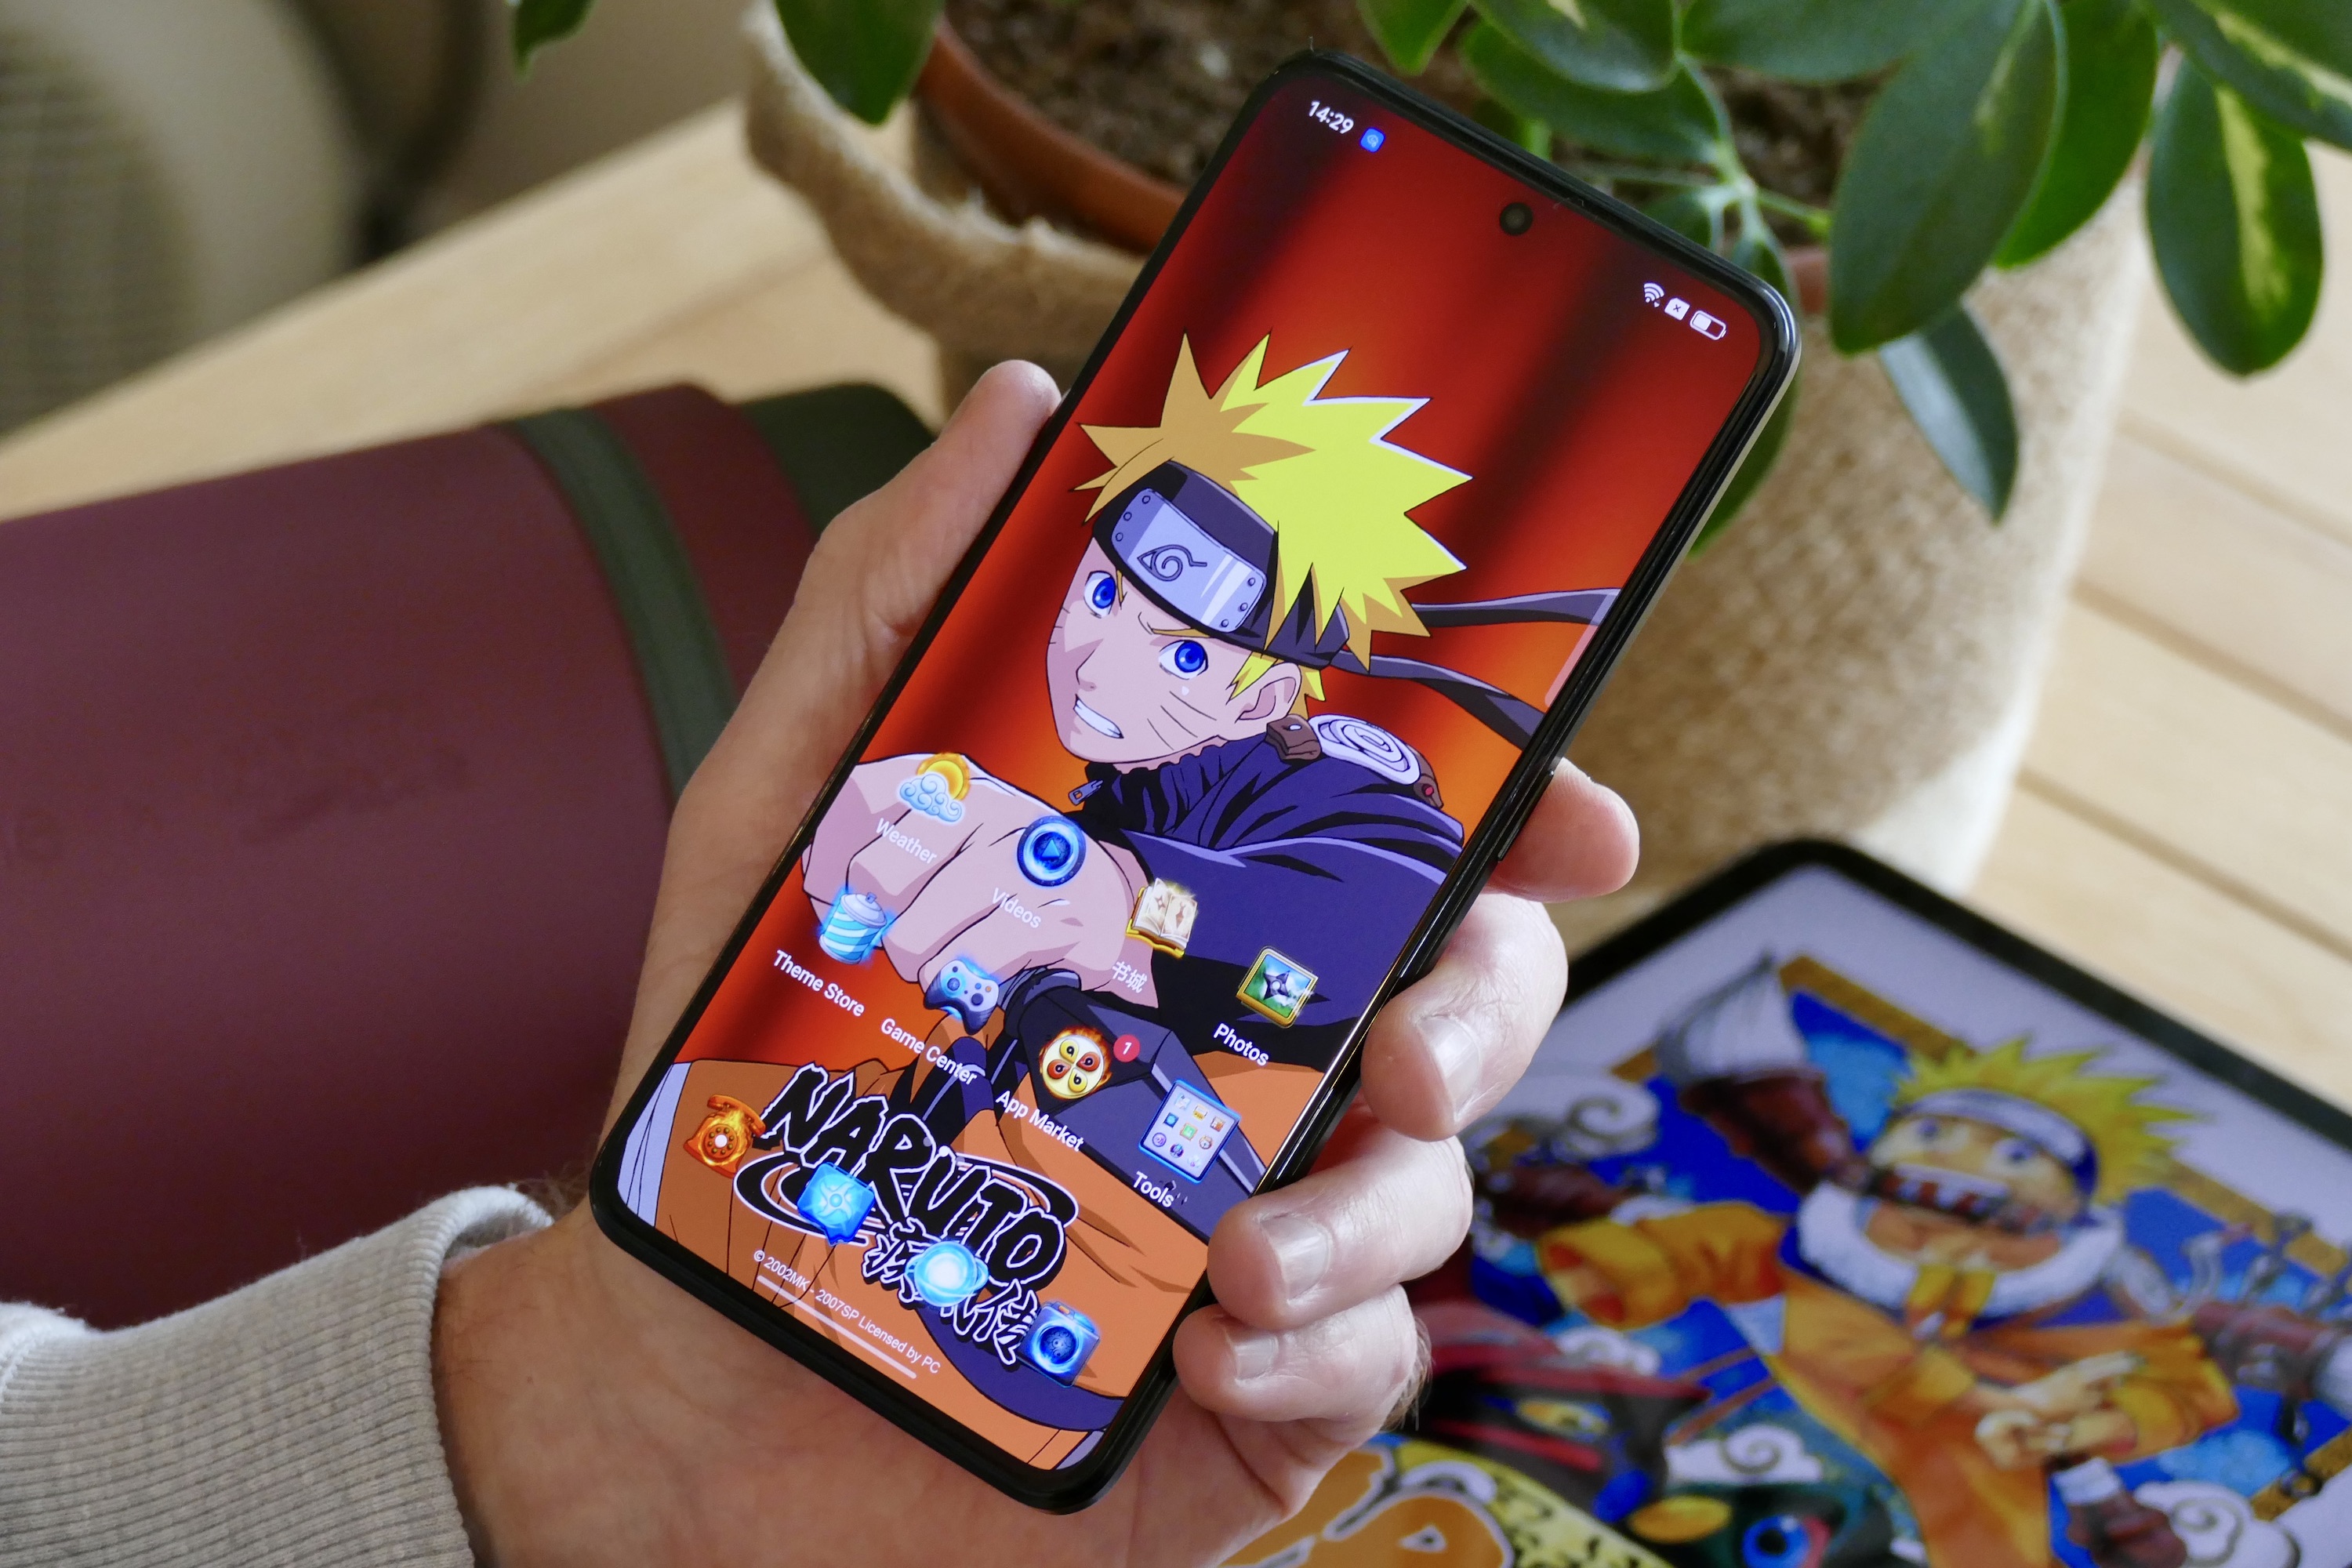 Naruto Mobile (CN) Gameplay IOS / Android 